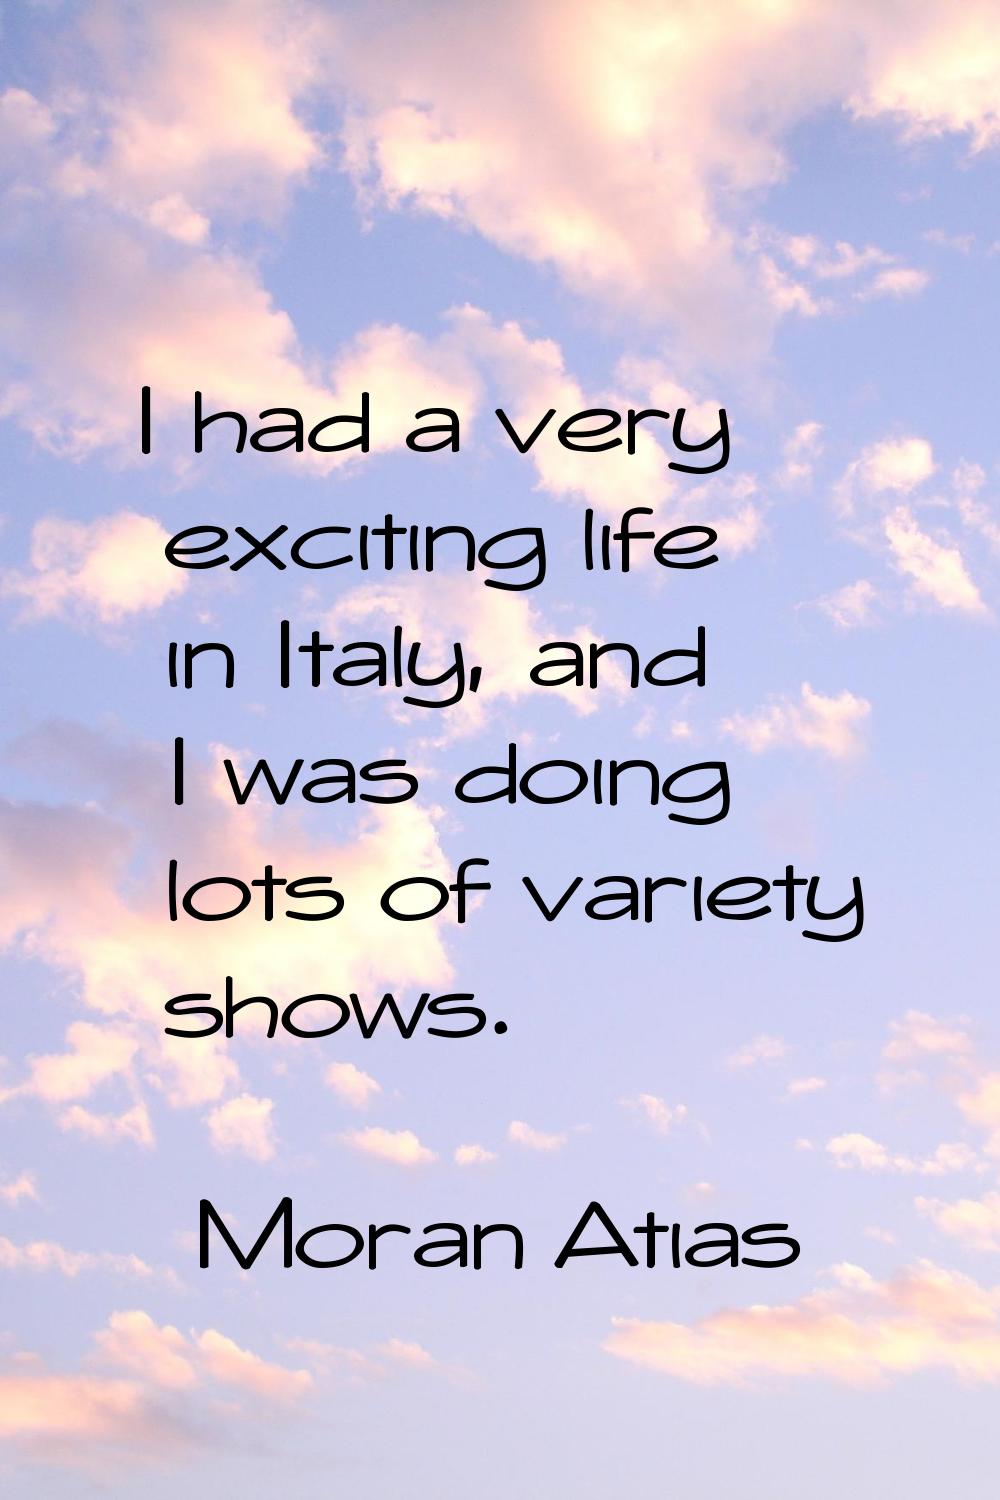 I had a very exciting life in Italy, and I was doing lots of variety shows.